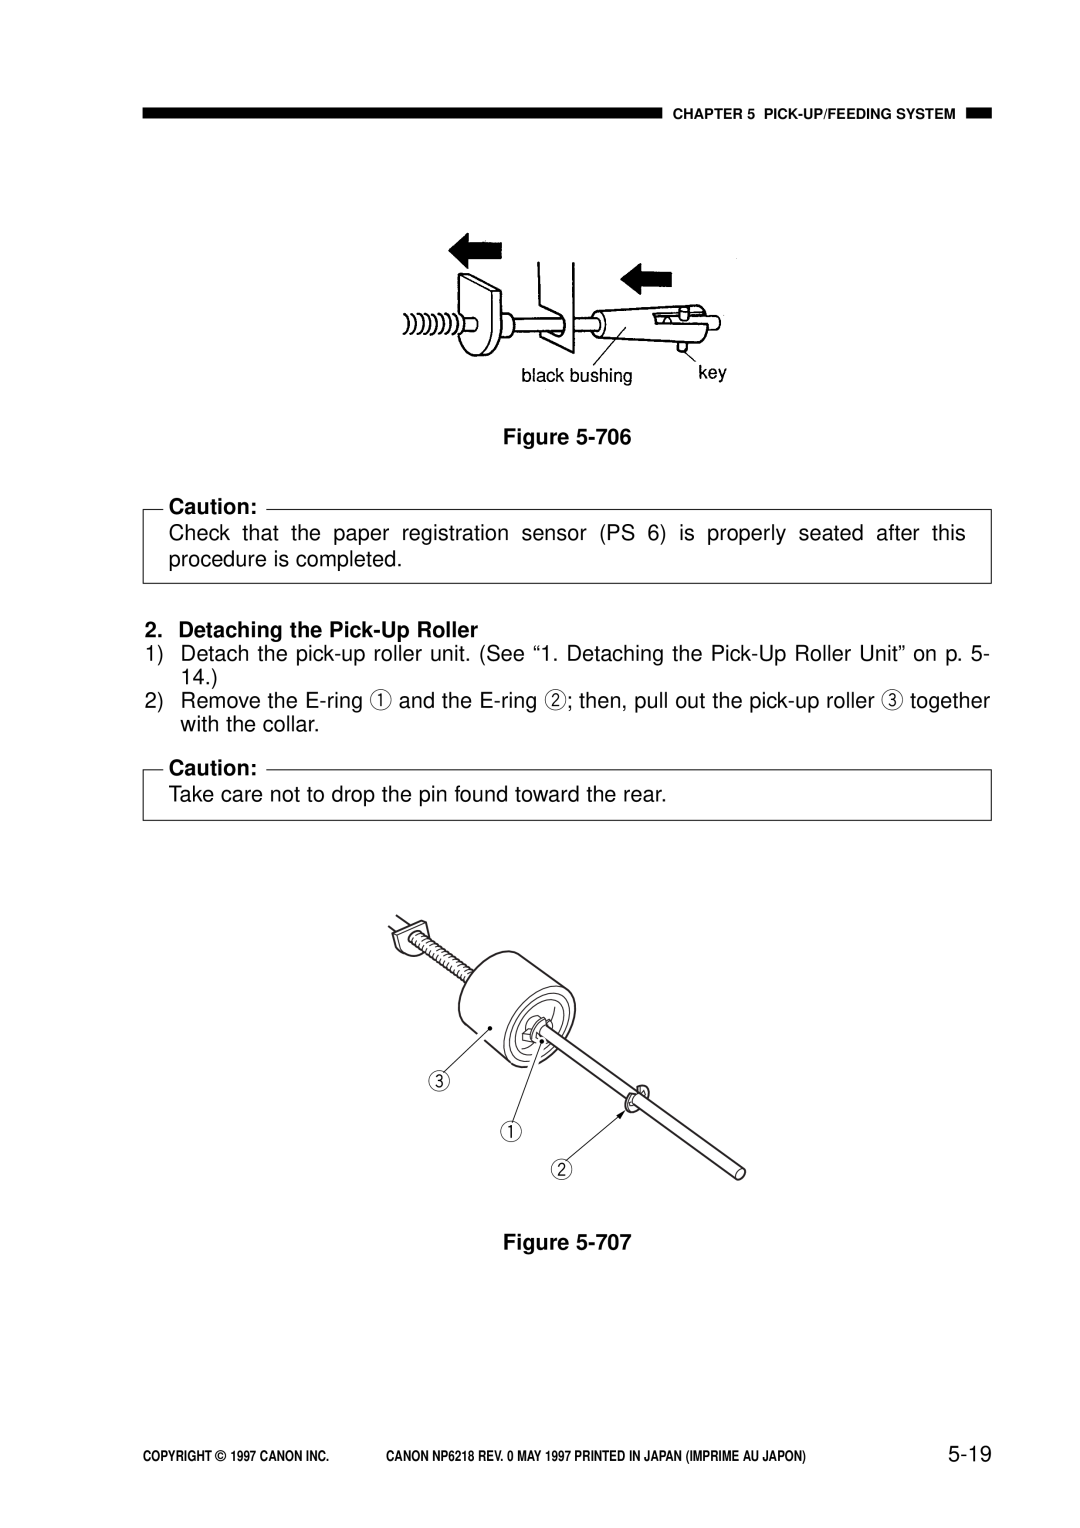 Canon NP6218, FY8-13EX-000 service manual Detaching the Pick-Up Roller, 5-19 